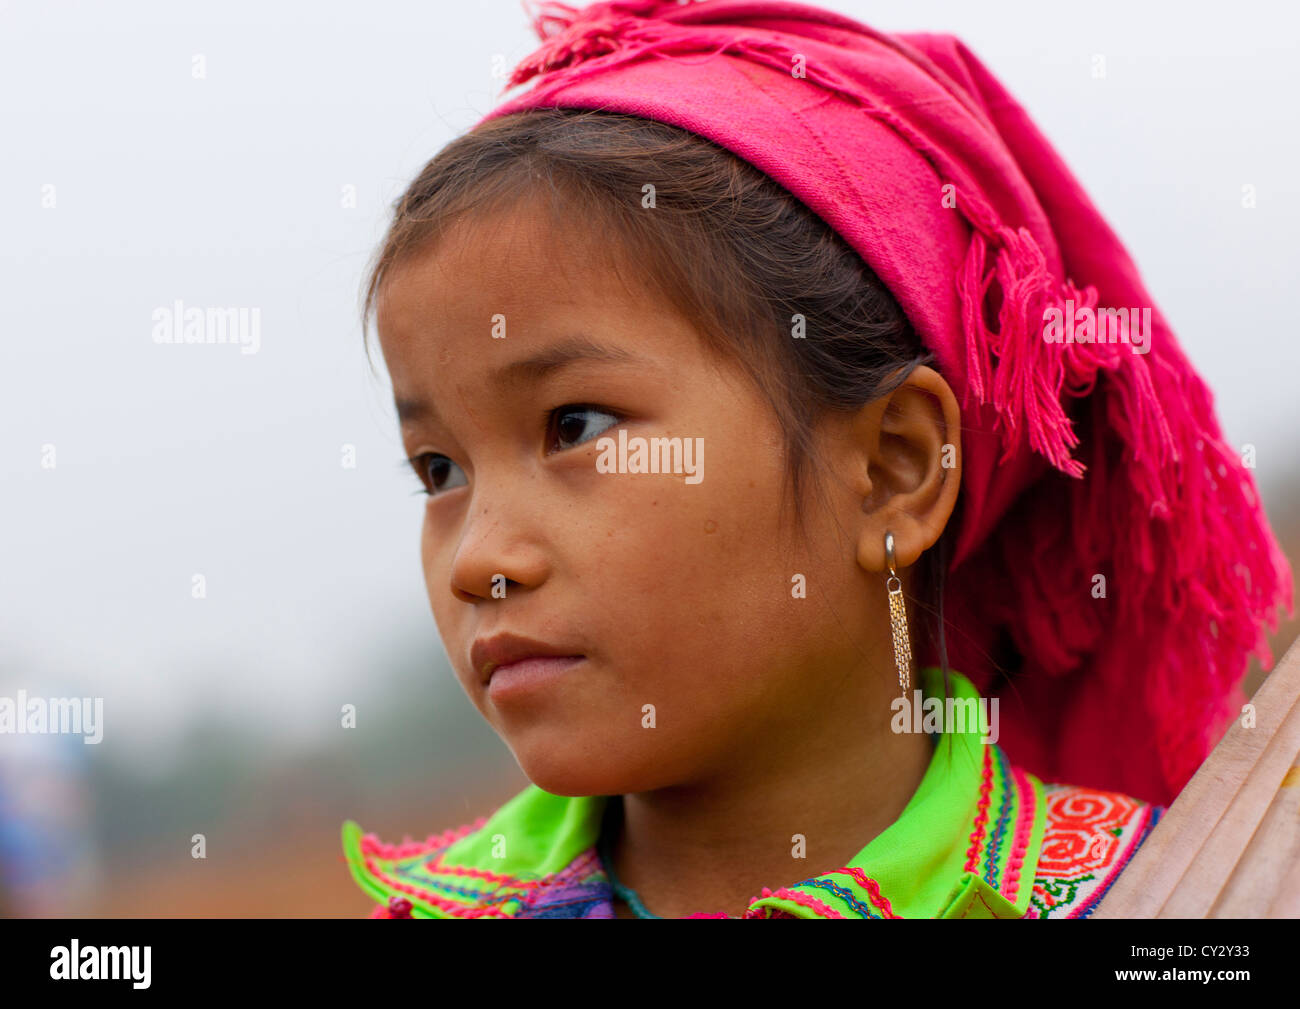 Flower Hmong Young Girl With Pink Headscarf, Sapa, Vietnam Stock Photo